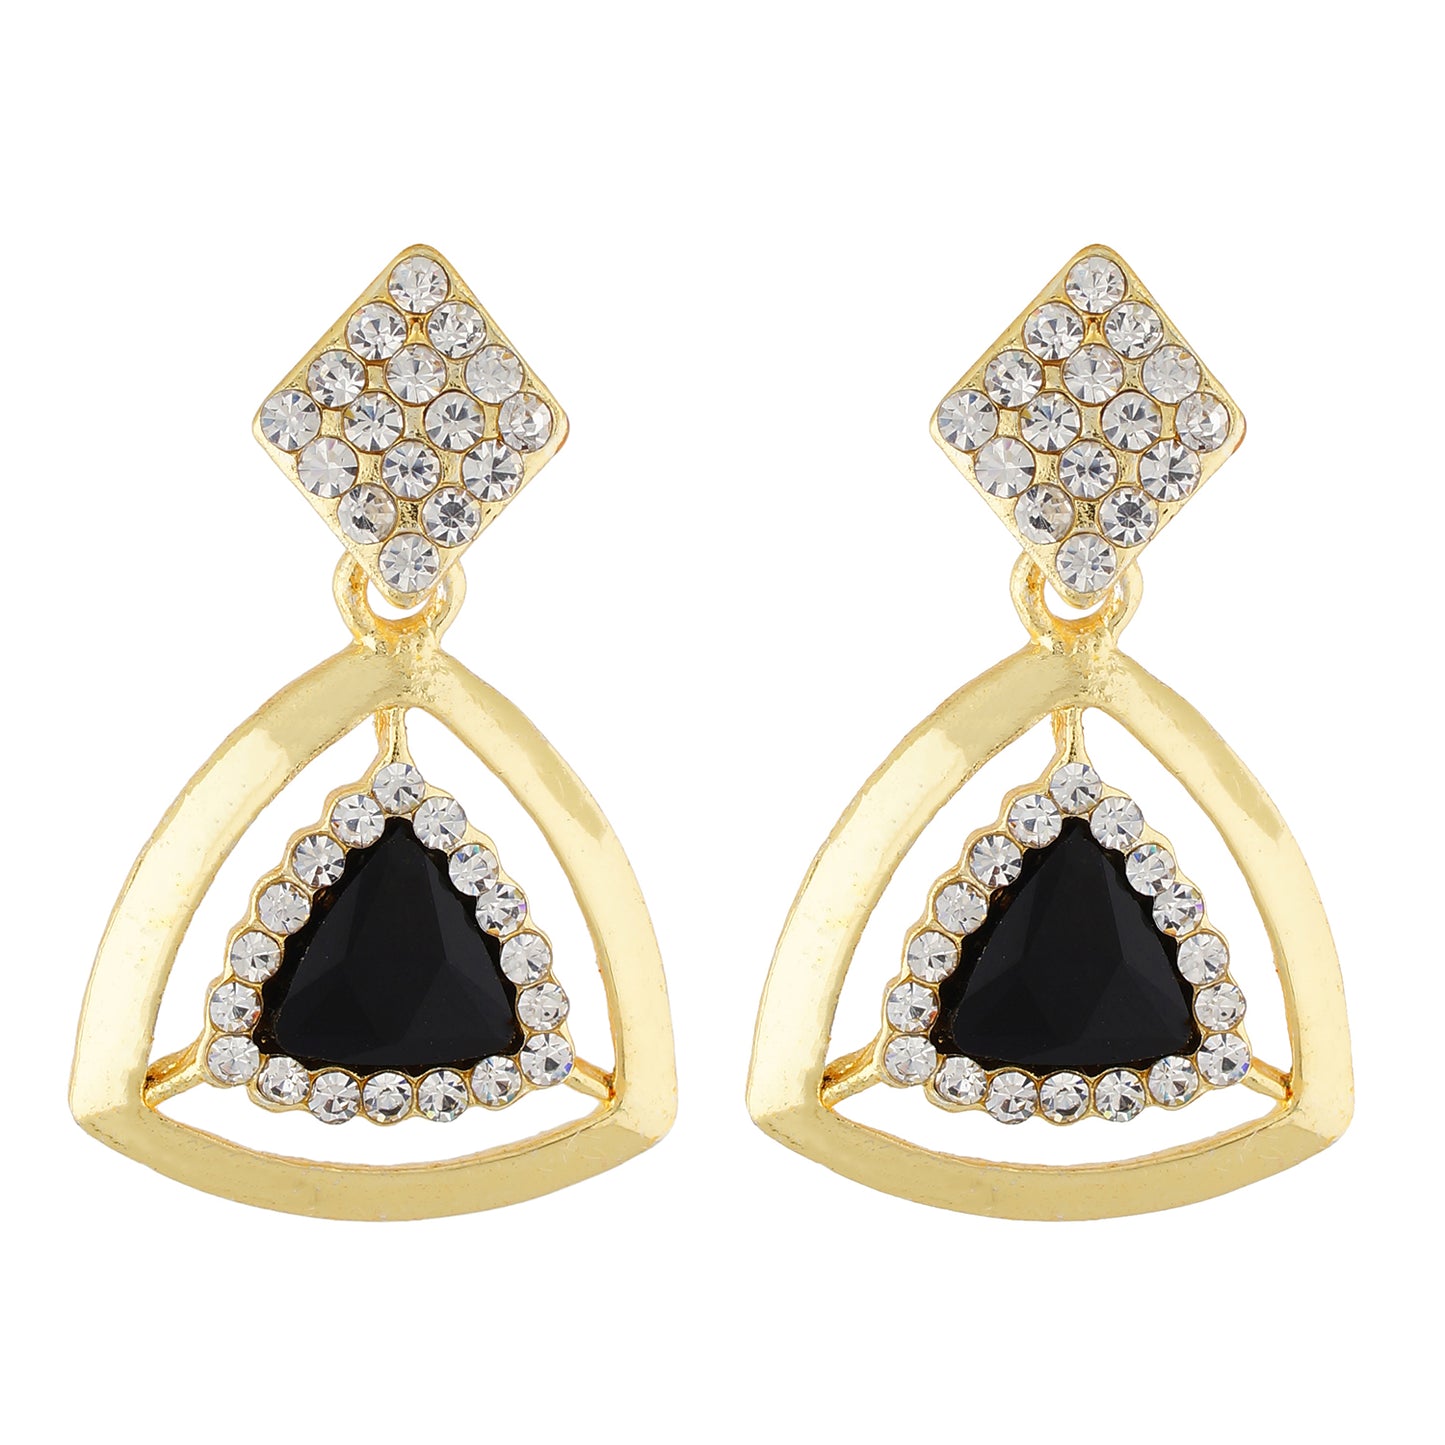 Incredible Black and Gold Colour Triangular Design Earring for Girls and Women